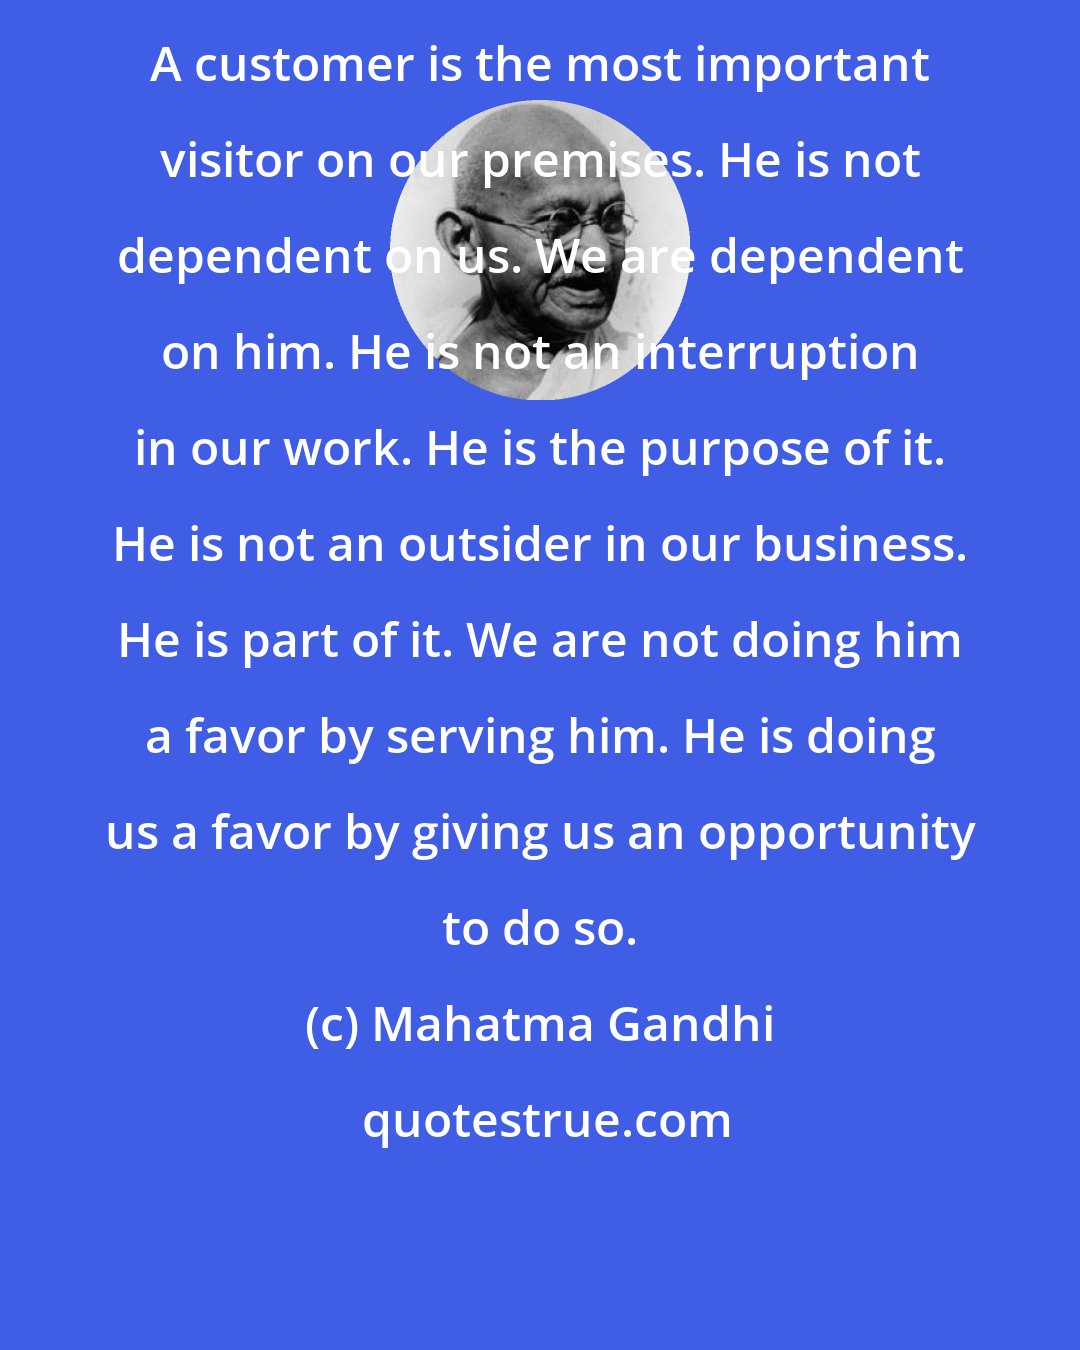 Mahatma Gandhi: A customer is the most important visitor on our premises. He is not dependent on us. We are dependent on him. He is not an interruption in our work. He is the purpose of it. He is not an outsider in our business. He is part of it. We are not doing him a favor by serving him. He is doing us a favor by giving us an opportunity to do so.